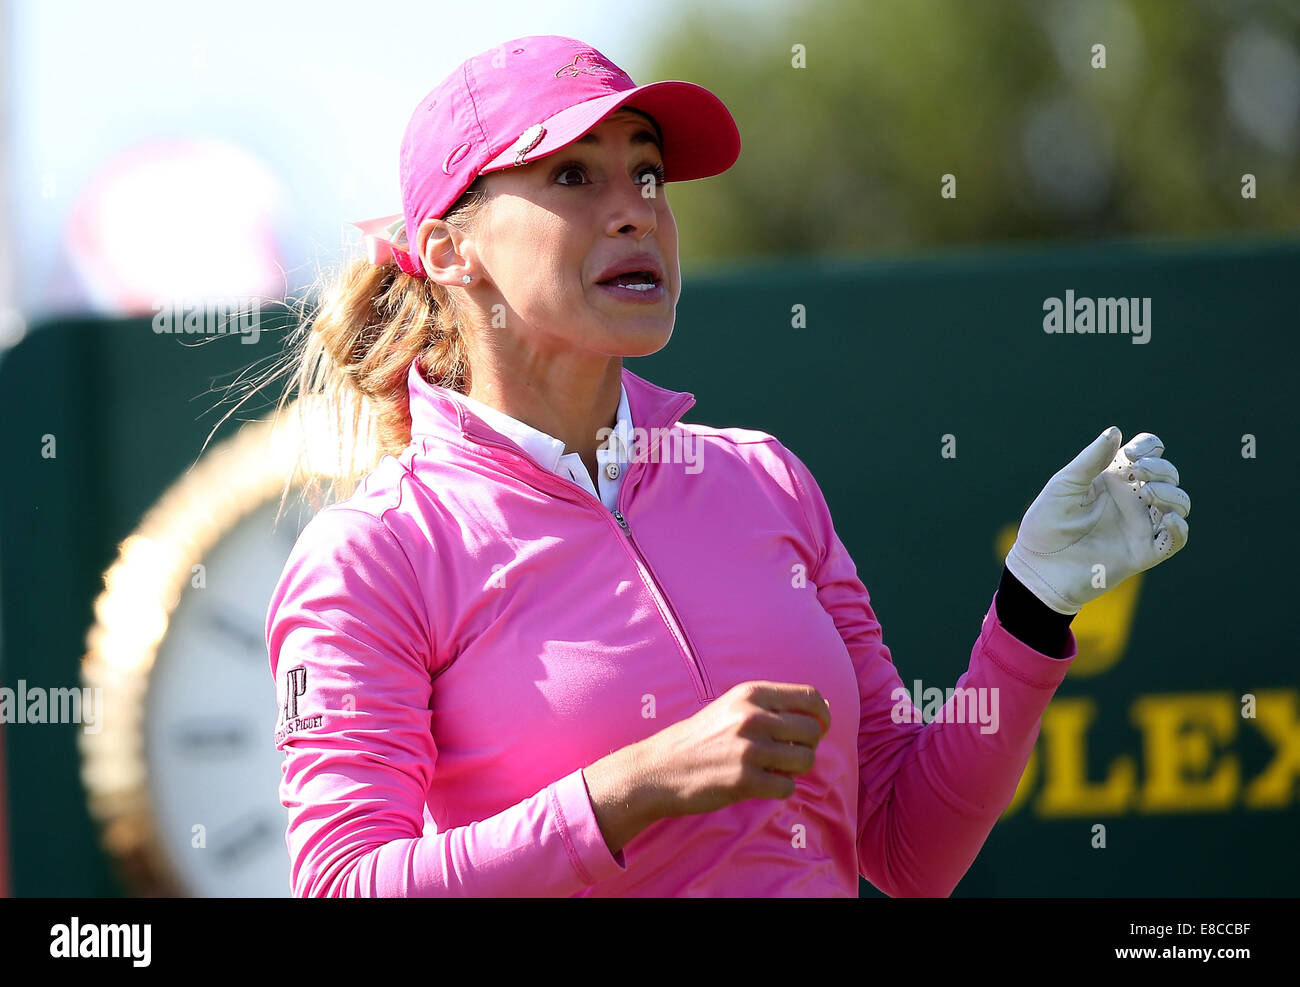 Beijing, China. 5th Oct, 2014. Belen Mozo of Spain reacts to her teeing off during the final round of the 2014 Reignwood LPGA Classic at the Jack Nicklaus-designed Reignwood aPine Valley Golf Club near Beijing, China, on Oct. 5, 2014. Belen Mozo ranked the 15th place. Credit:  Li Ming/Xinhua/Alamy Live News Stock Photo